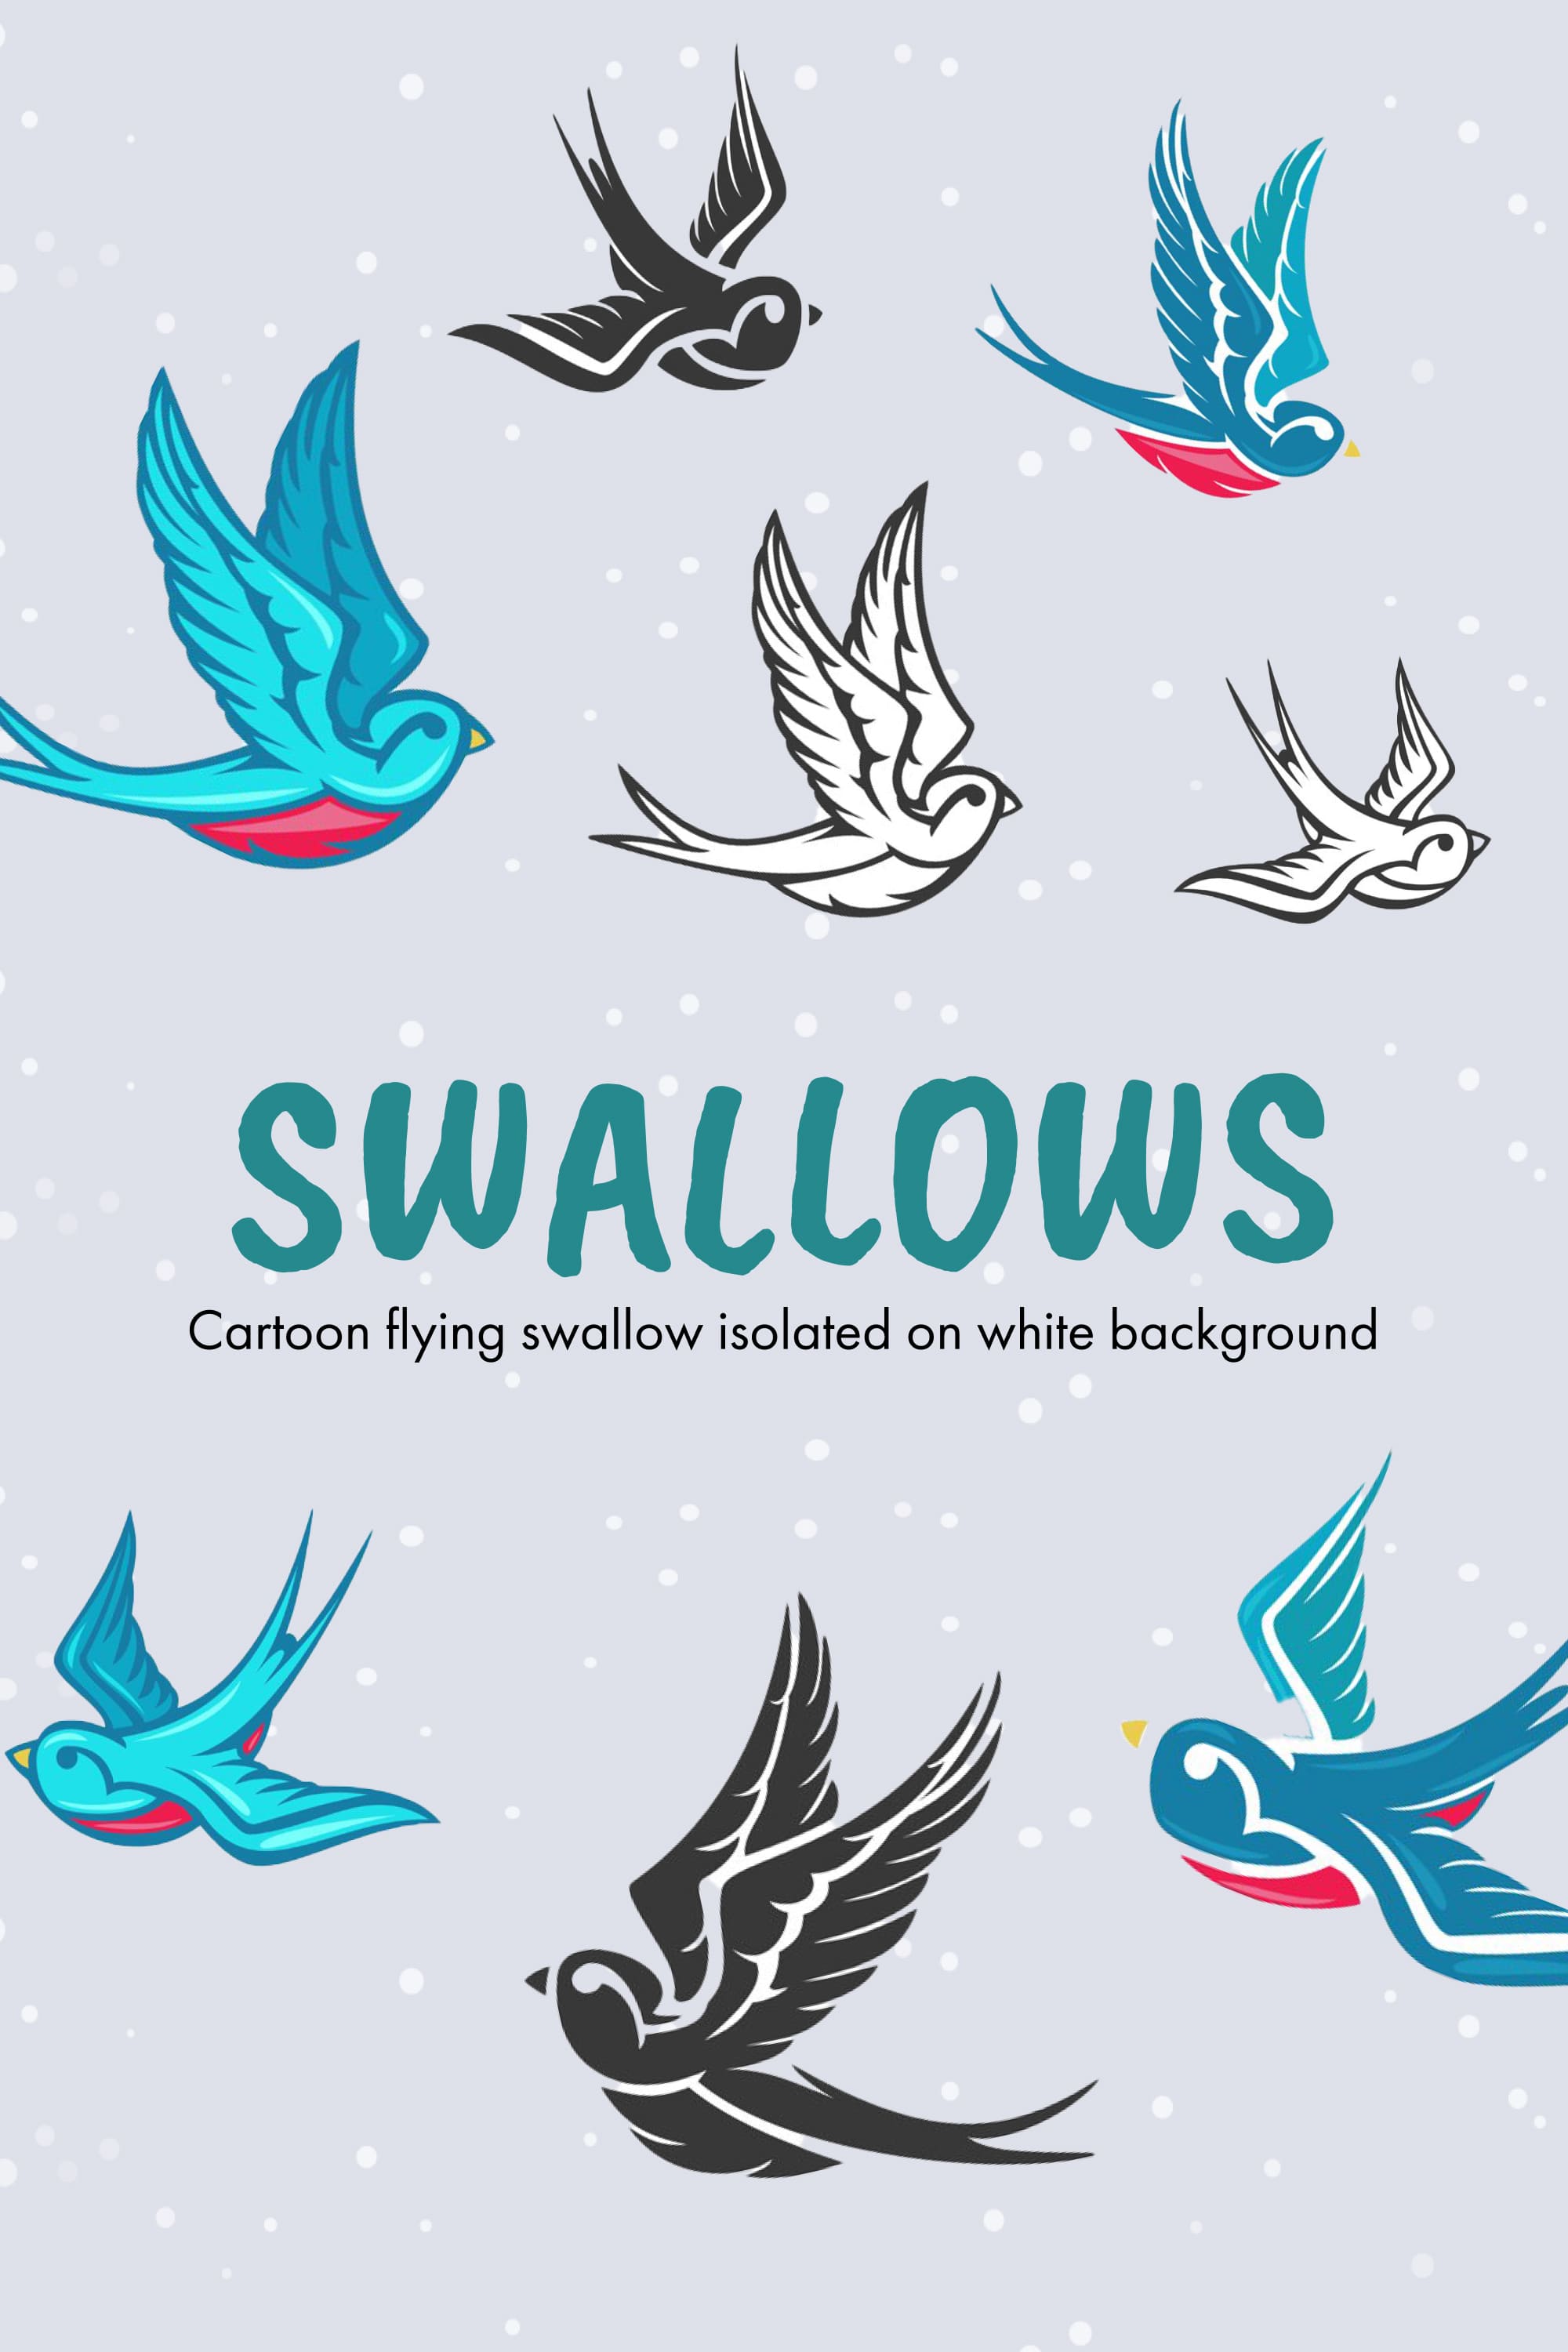 Swallows - pinterest image preview.